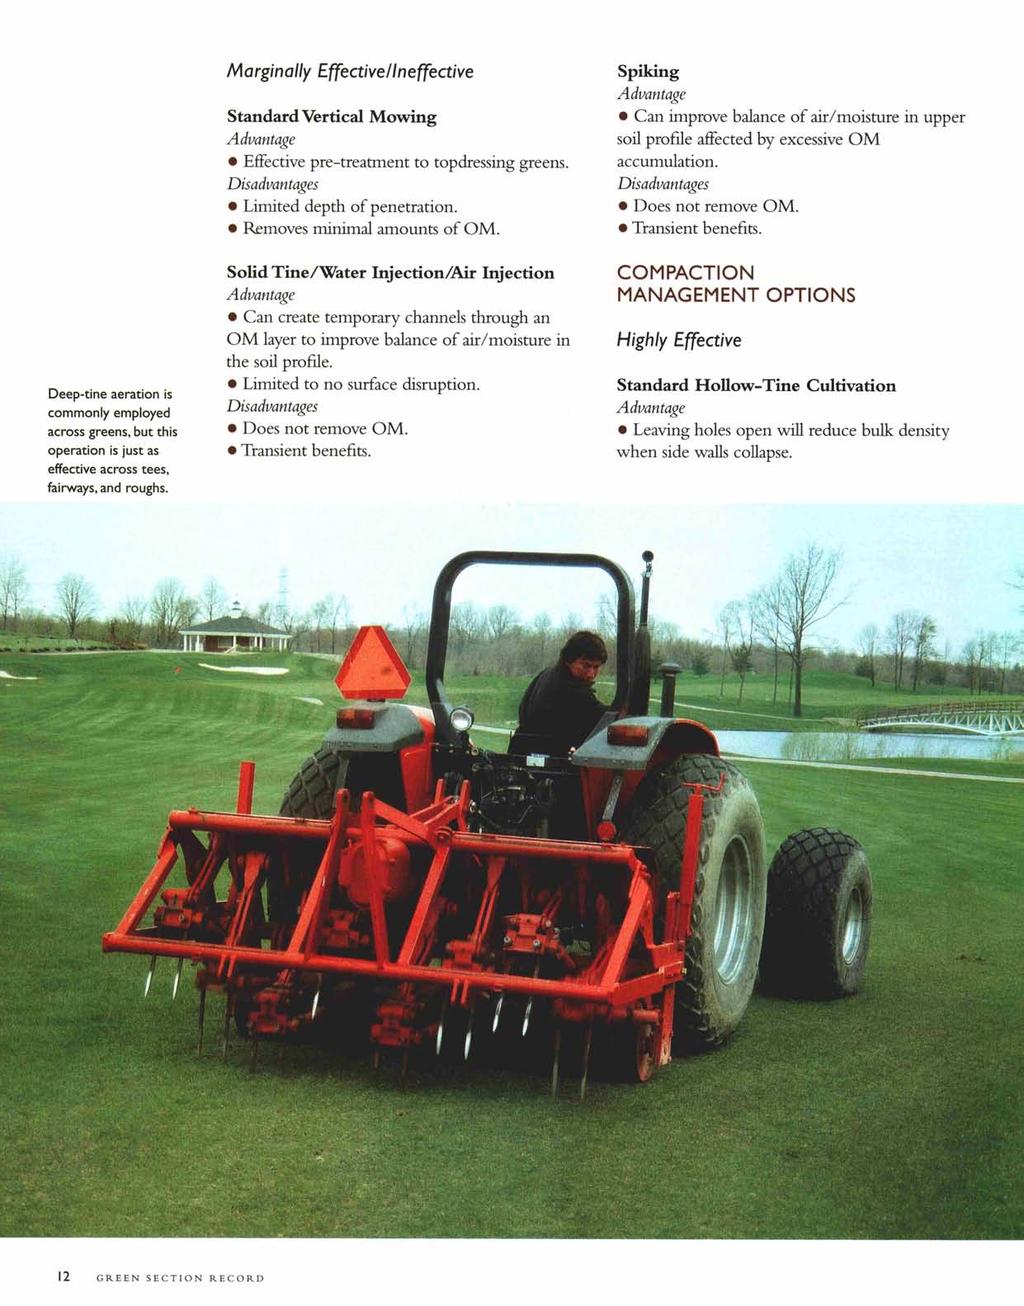 Deep-tine aeration is commonly employed across greens, but this operation is just as effective across tees, fairways, and roughs.